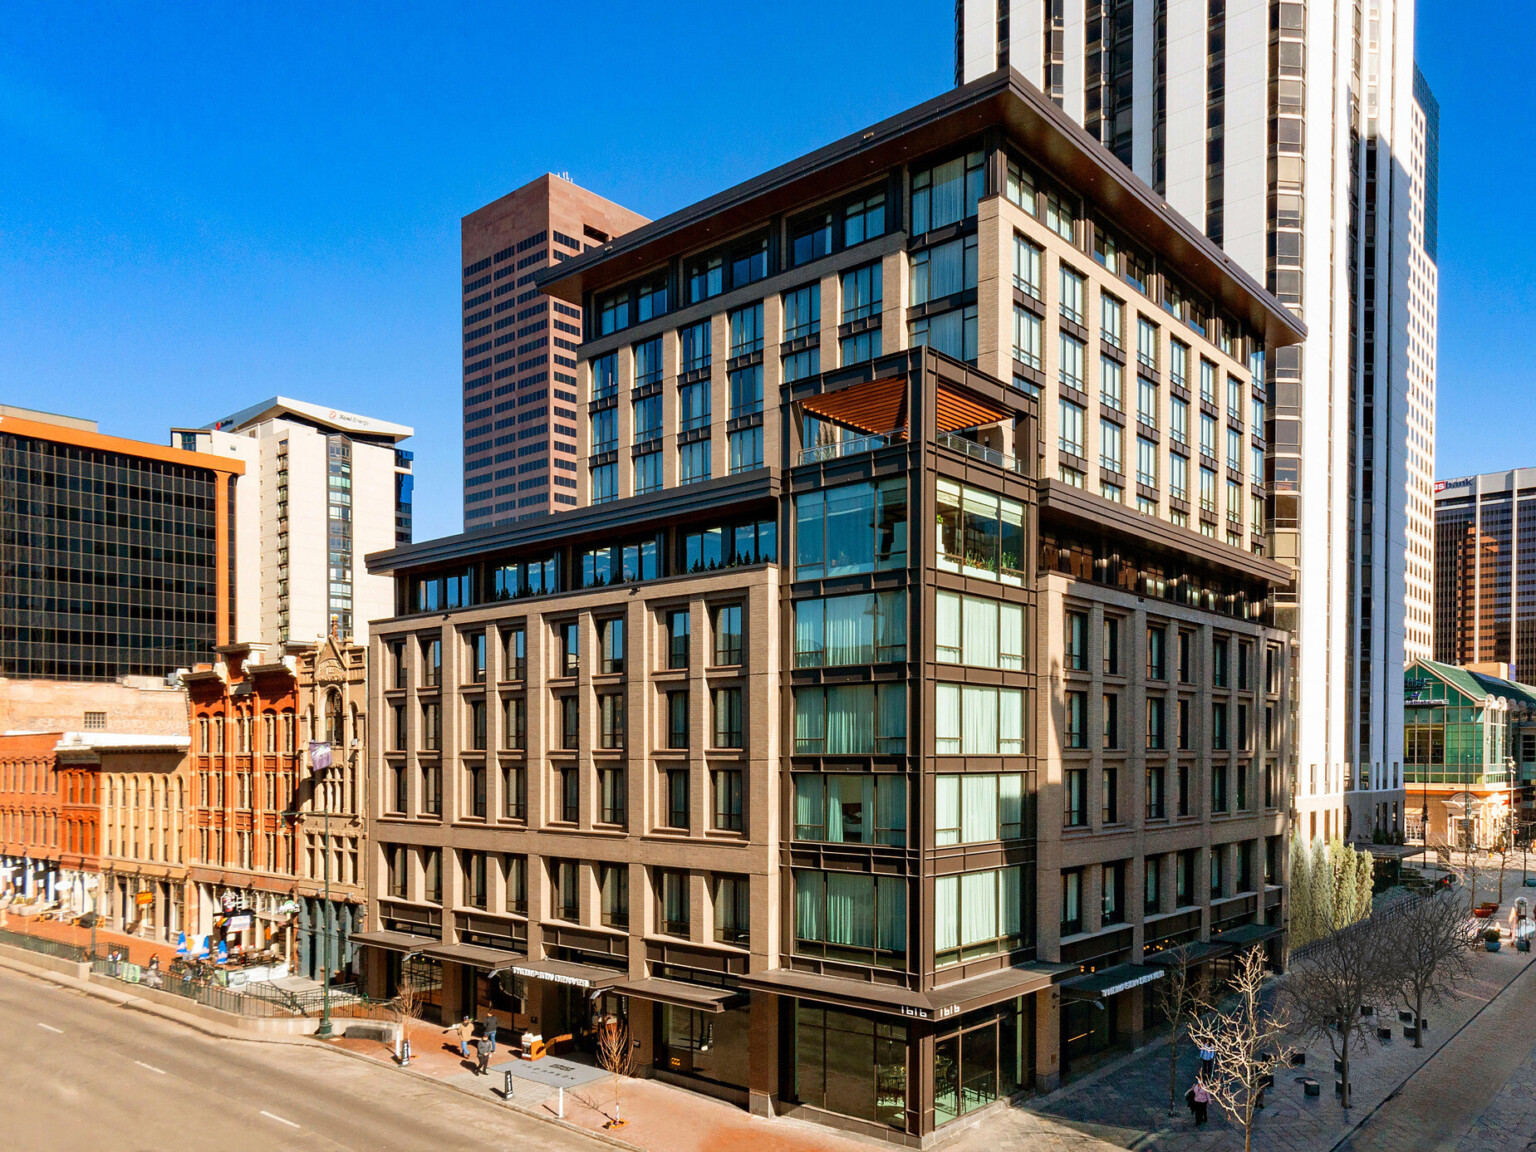 The Thompson Hotel Denver seen from corner with glass tower and stone façade on each side.